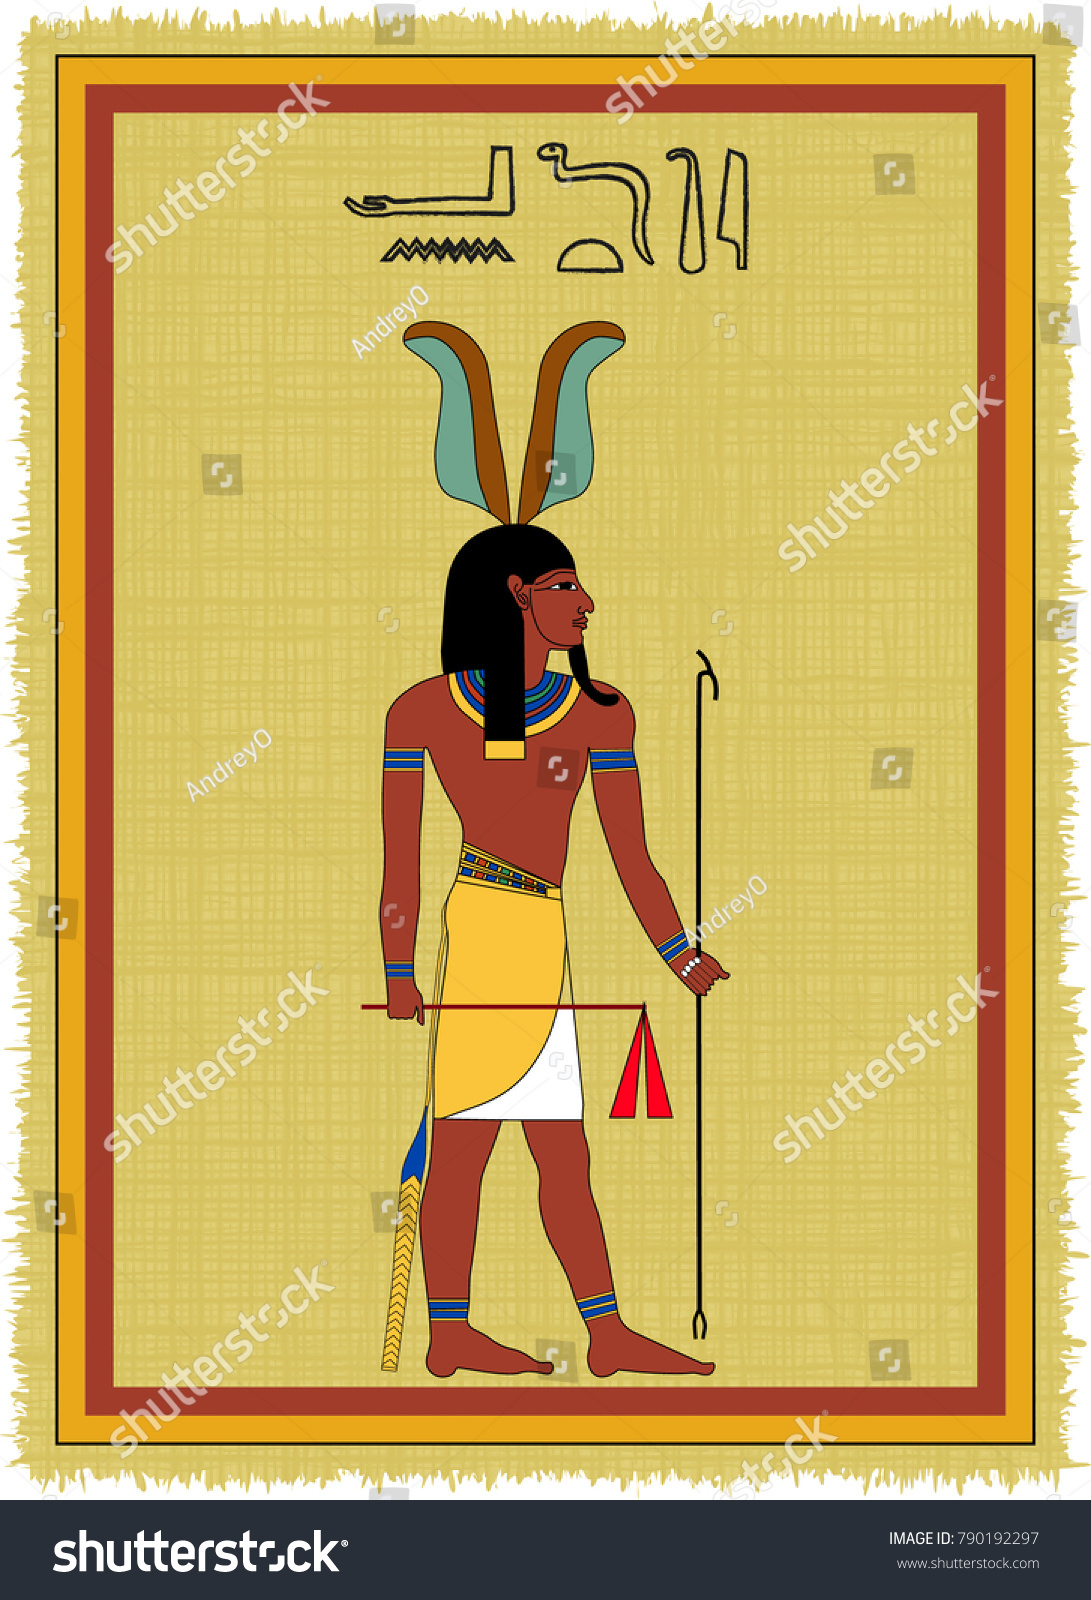 Papyrus Image Andjety Ancient Egyptian God Stock Vector (Royalty Free ...